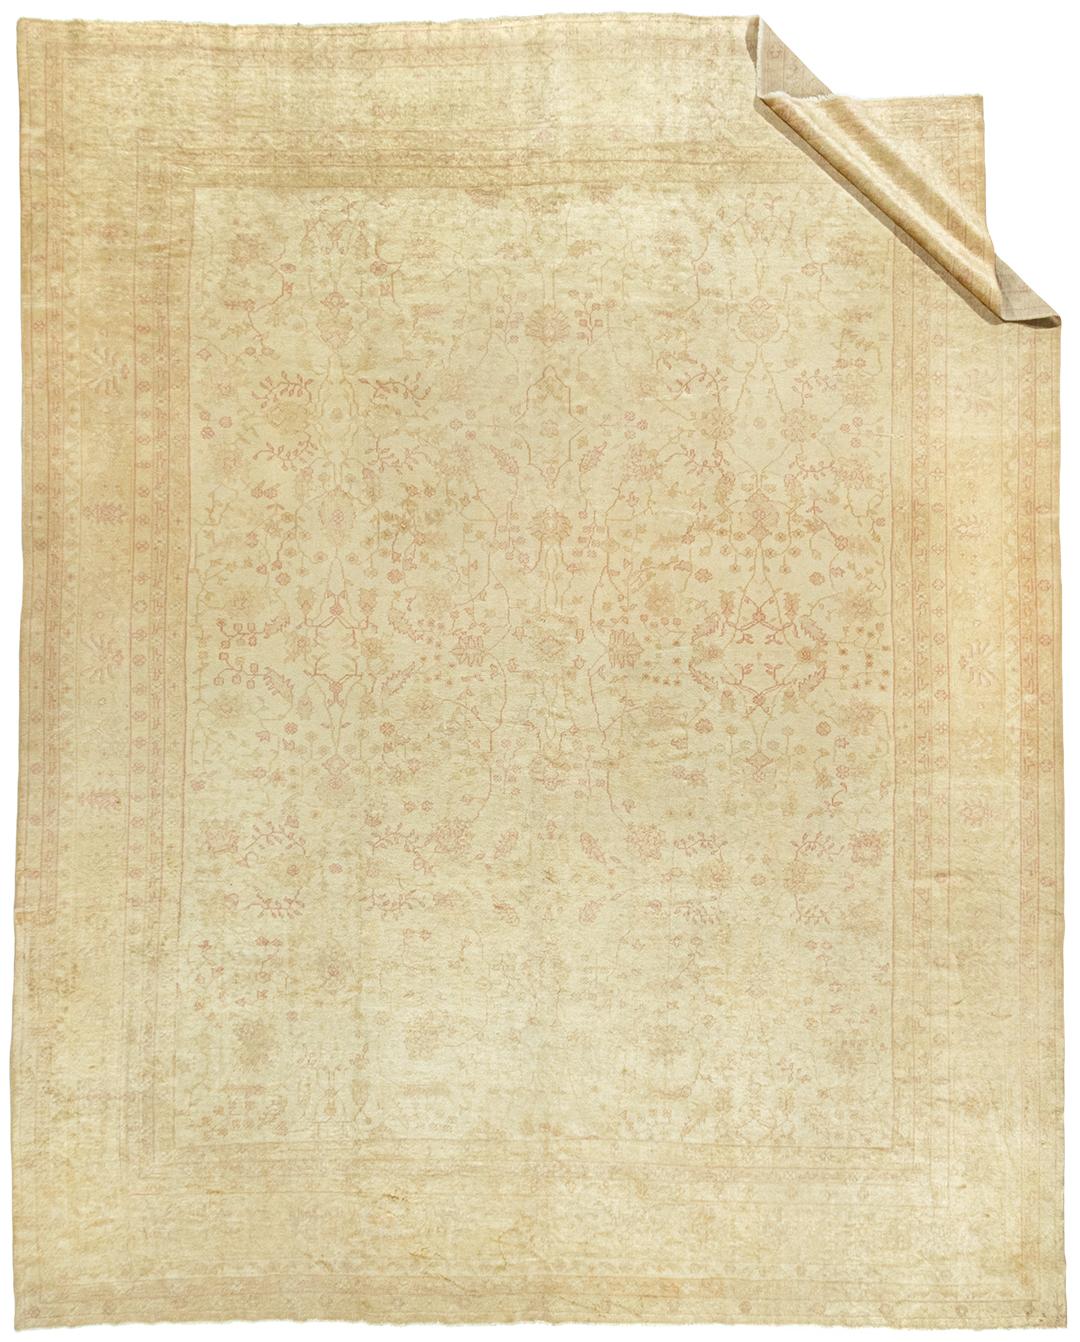 Antique Turkish Oushak rug, 13' x 16'. Delicate botanical patterns woven in soft rose and creams cover the central field on this antique Oushak rug from Turkey. A border of palmettes and repeating floral patterns is surrounded by four floral